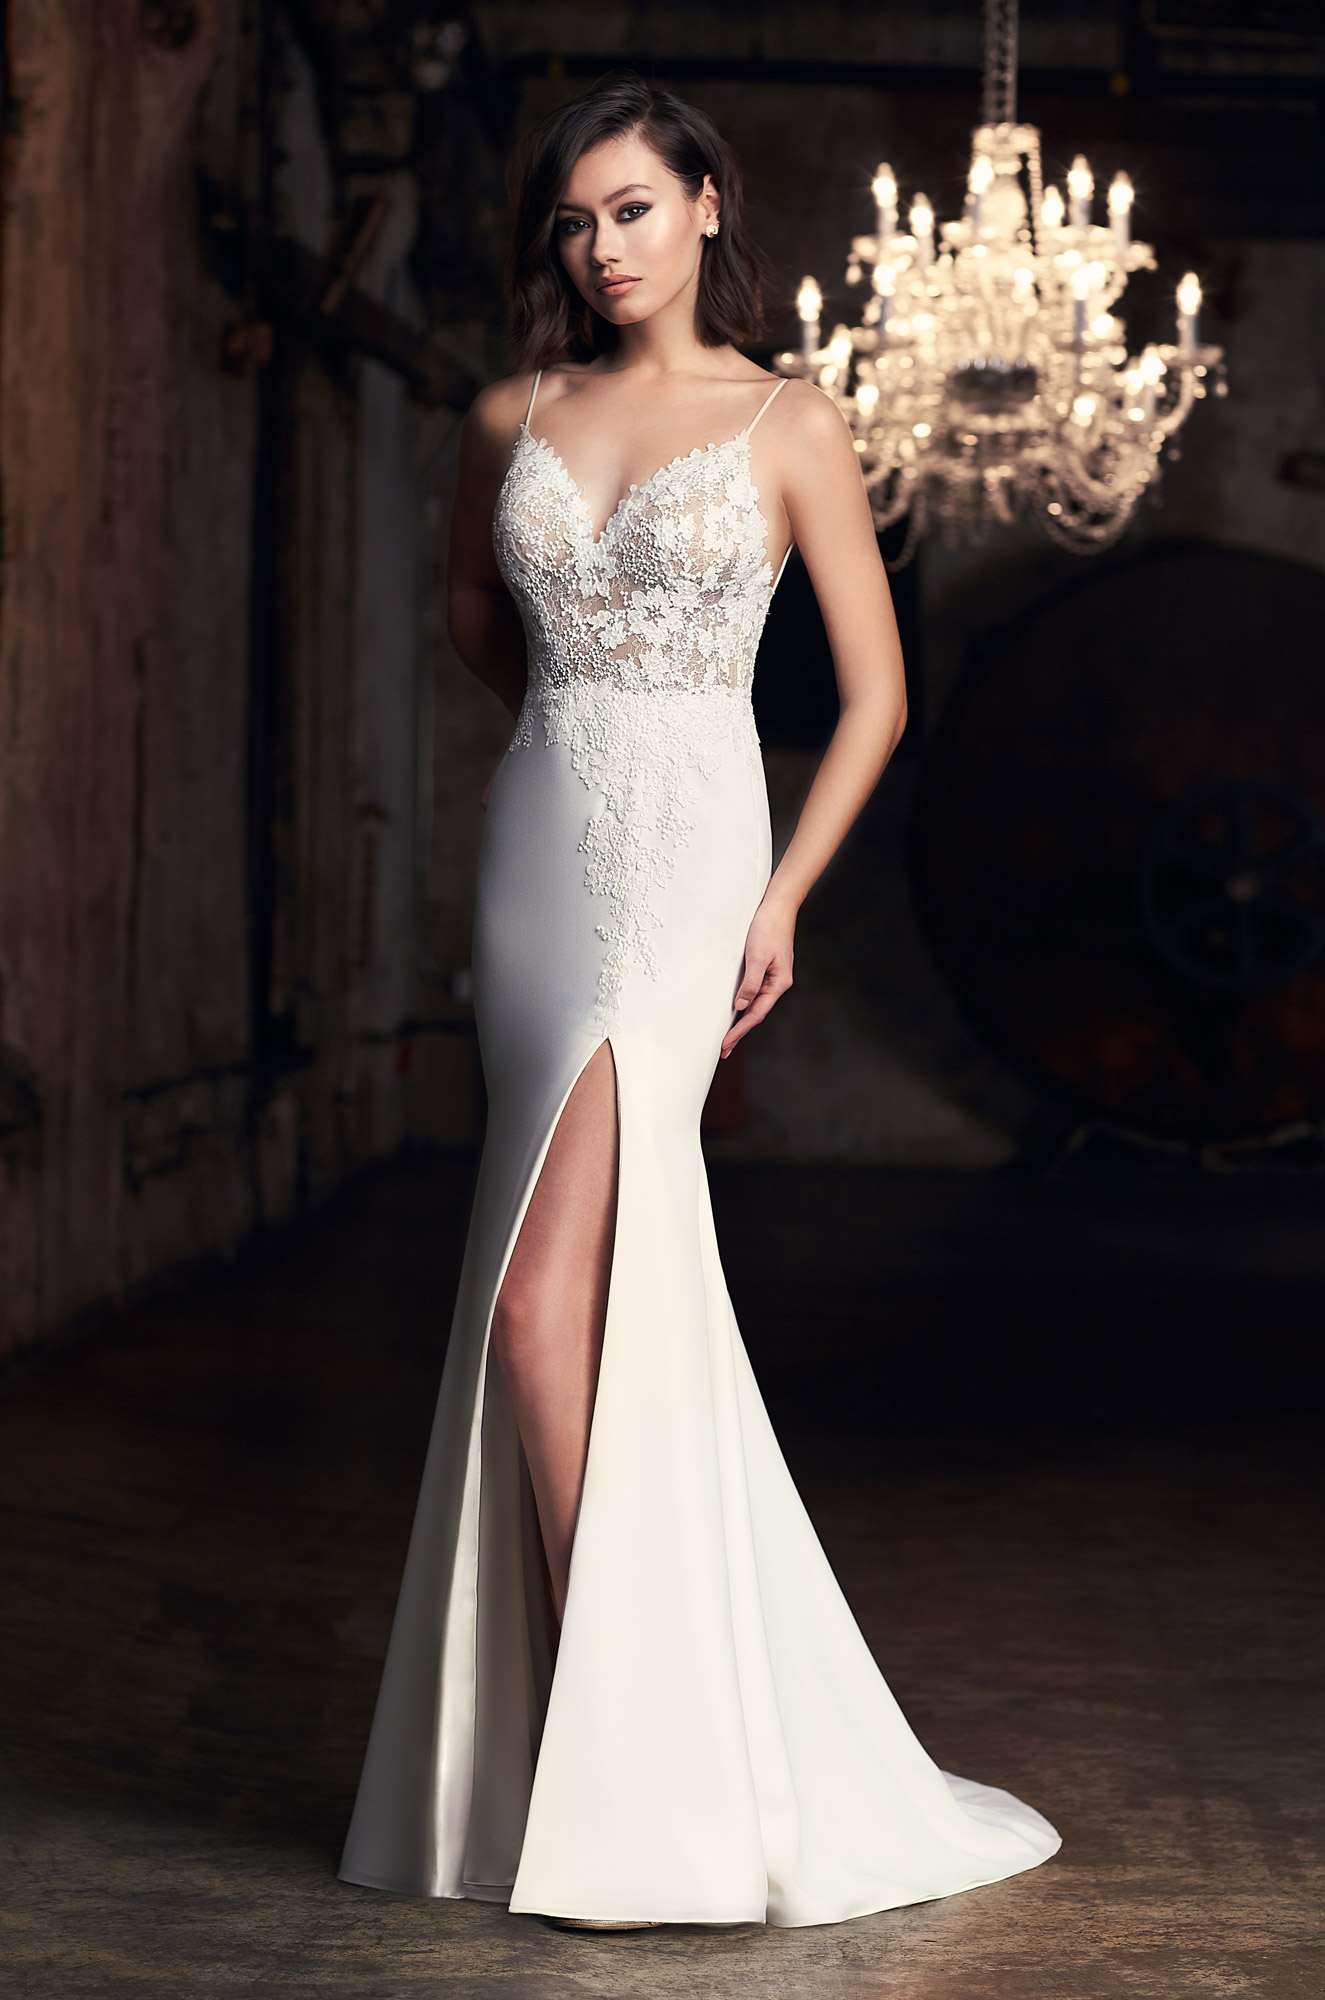 Spaghetti Strap Fit And Flare Wedding Dress With Slit | Kleinfeld Bridal